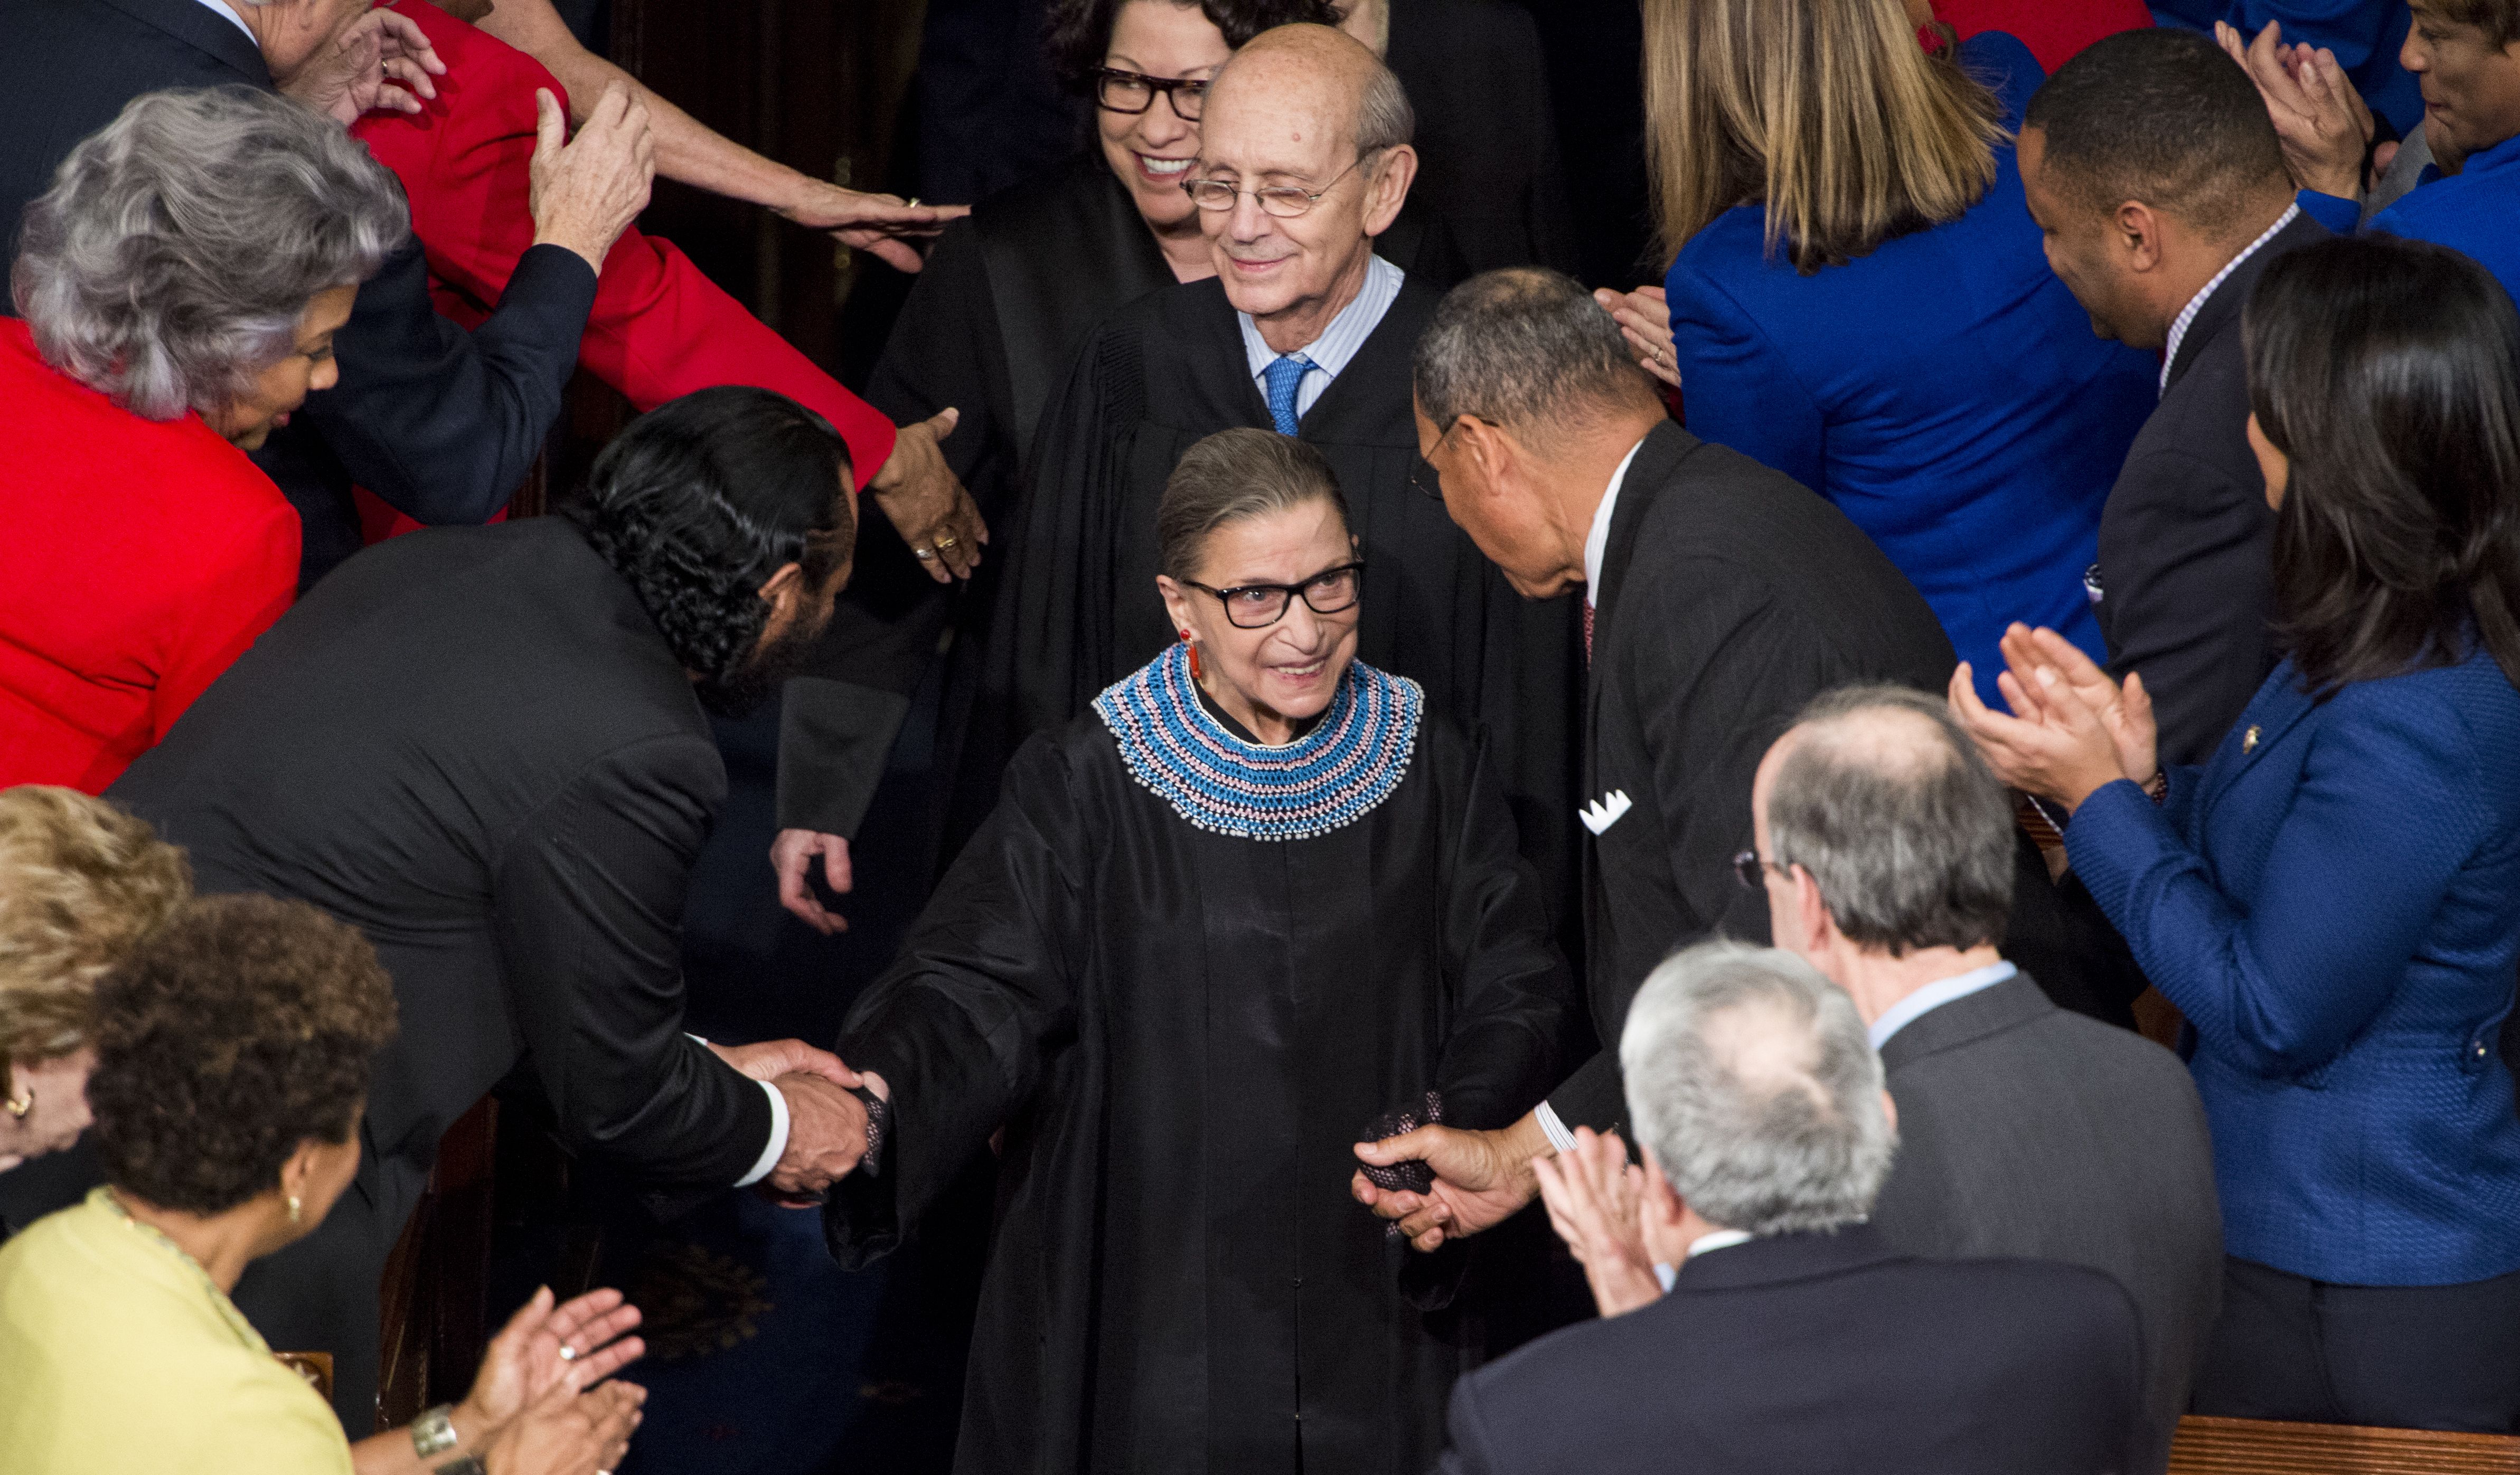 RBG arriving for President Obama's State of the Union in 2015. Photo: Bill Clark/CQ Roll Call